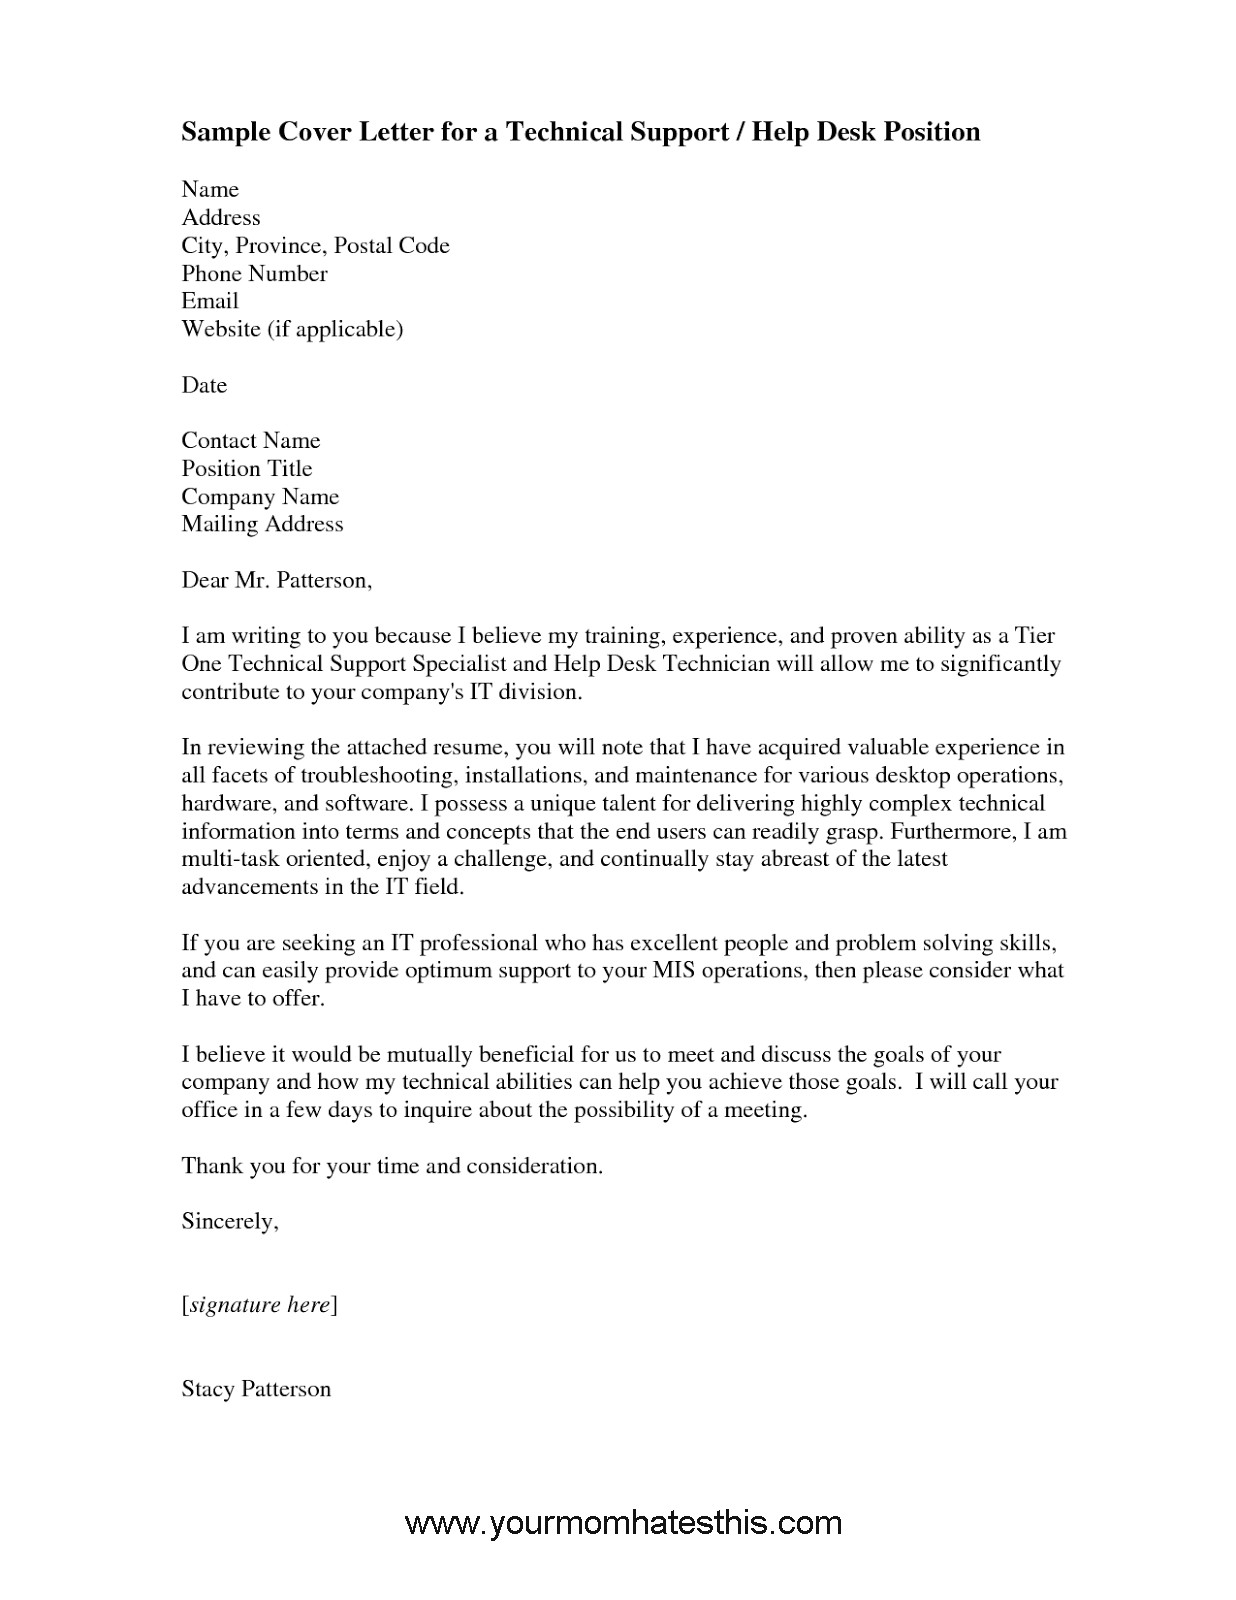 Cover Letter for It Help Desk Position Cover Letter Samples Download Free Cover Letter Templates